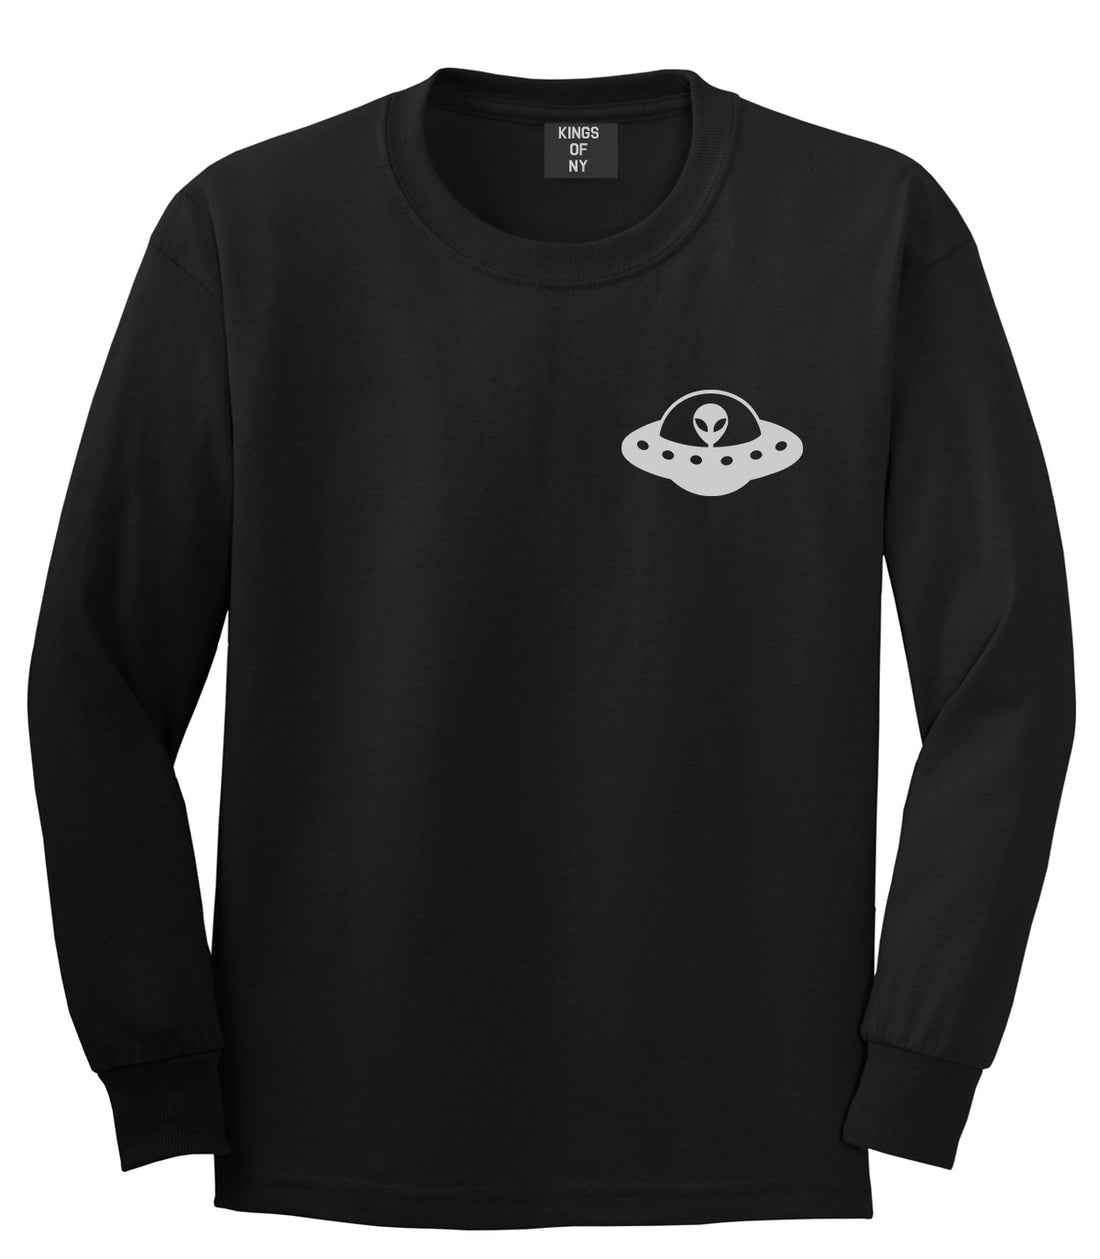 Alien Spaceship Chest Mens Black Long Sleeve T-Shirt by Kings Of NY